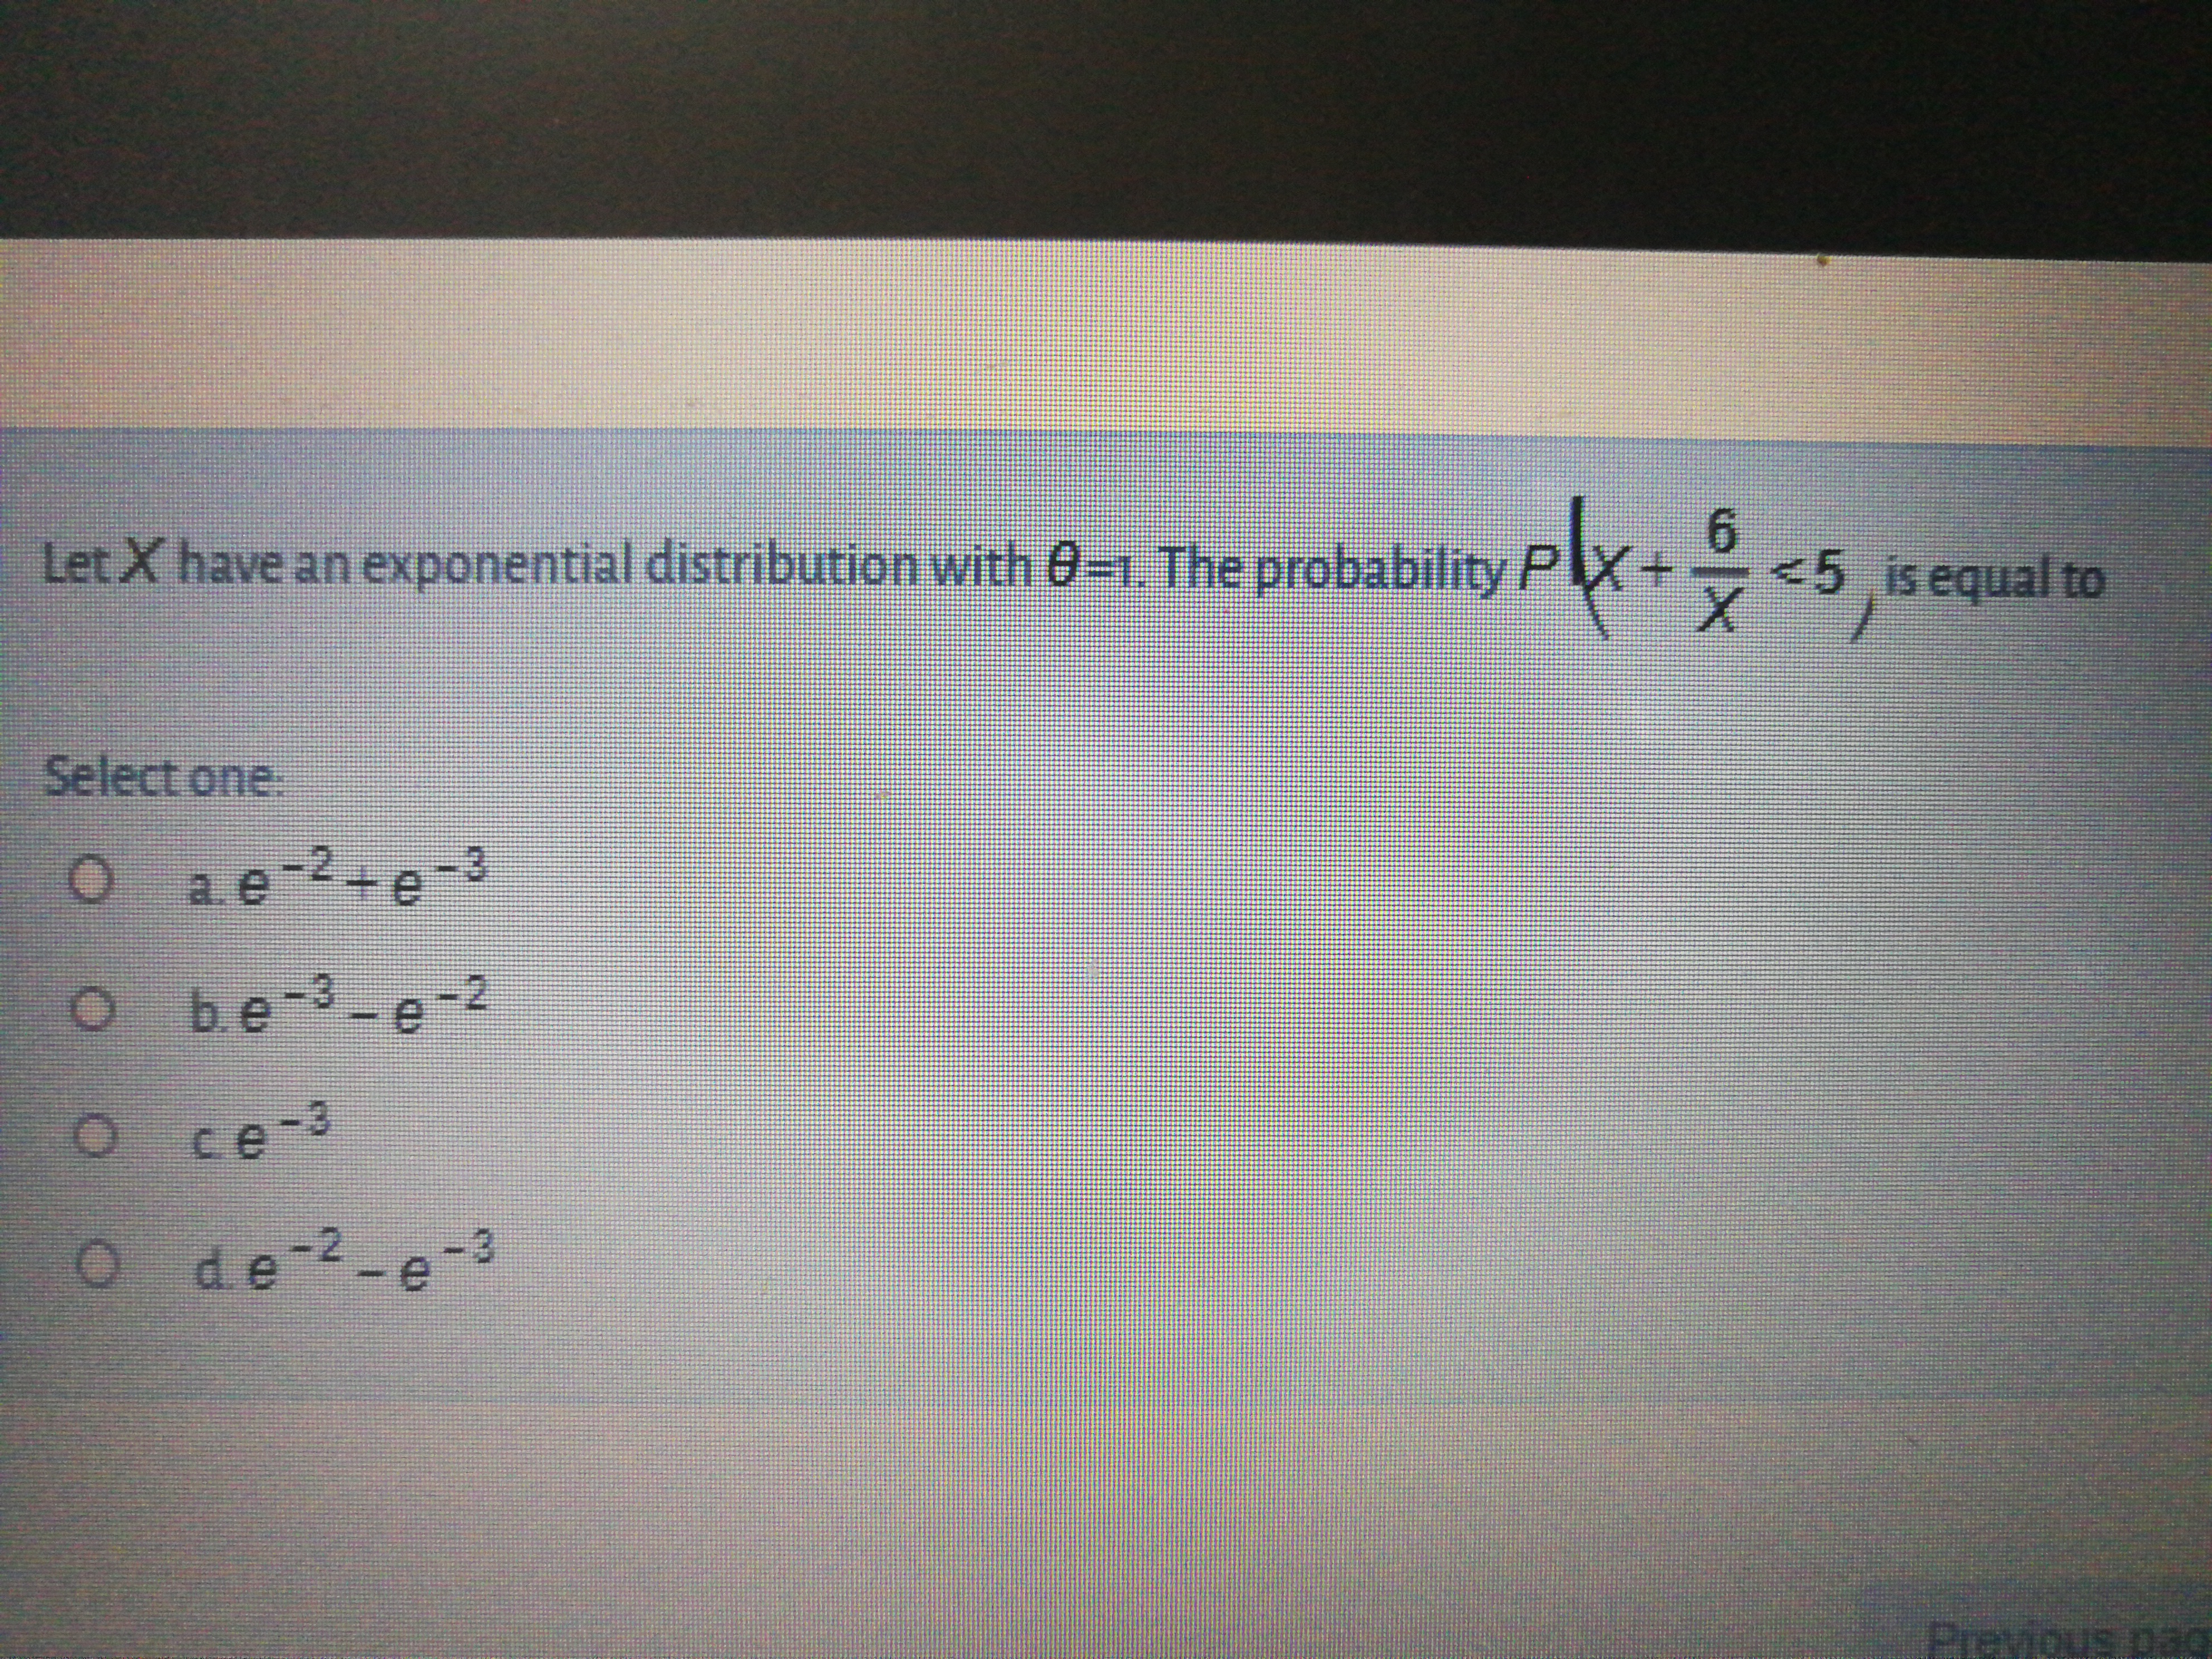 Let X have an exponential distribution with 0-1. The probability P
6.
<5is equal to
